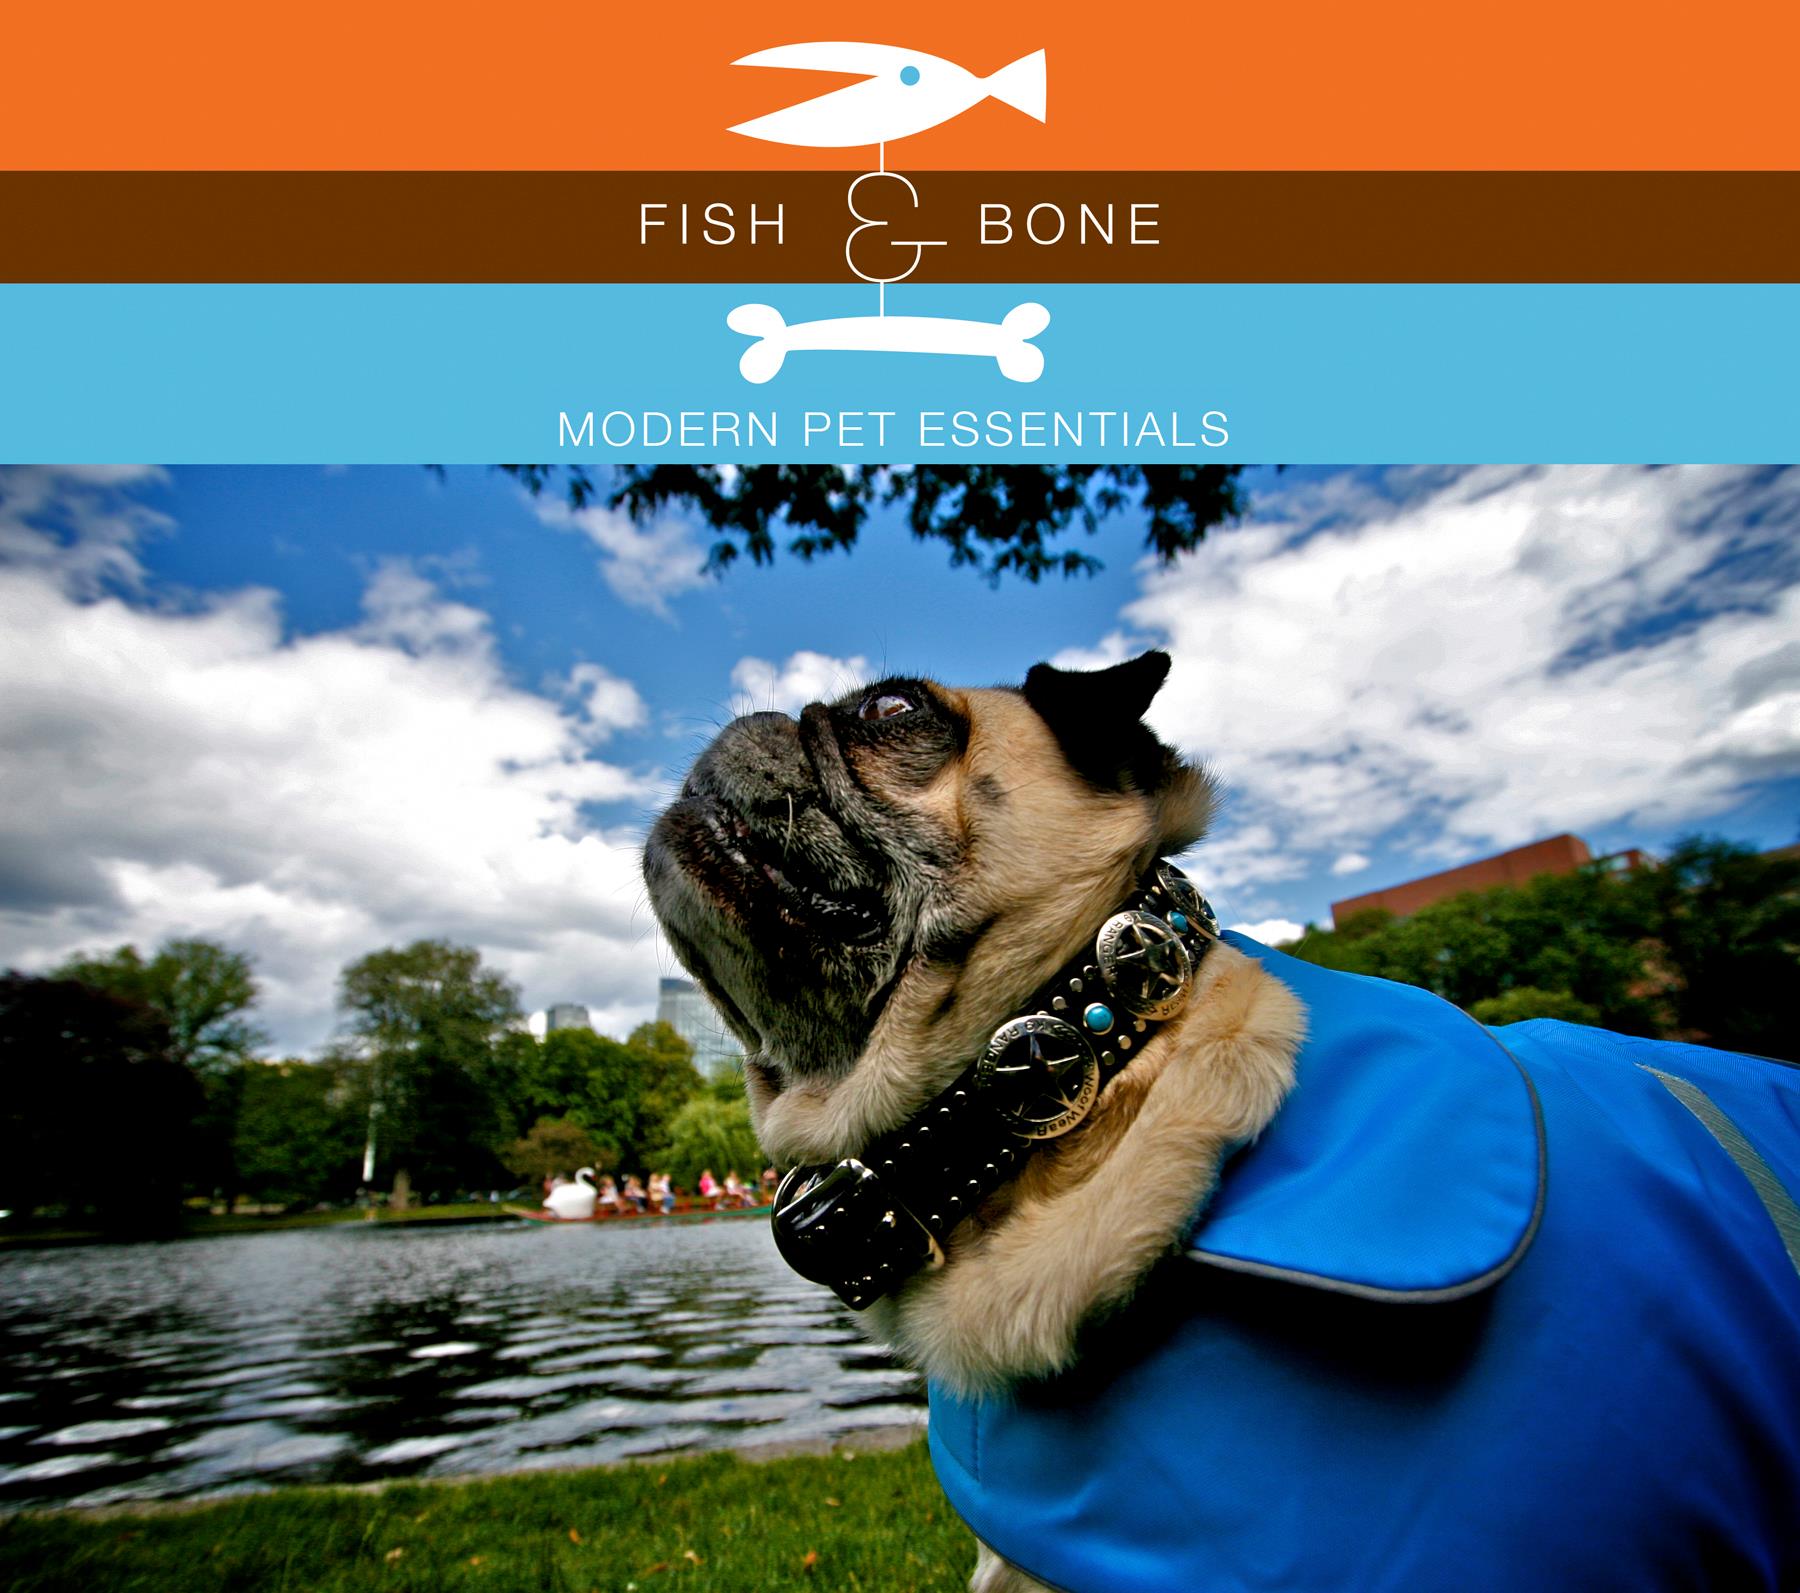 Gone to the Dogs: Local Pet Supply Store Fish & Bone in Boston